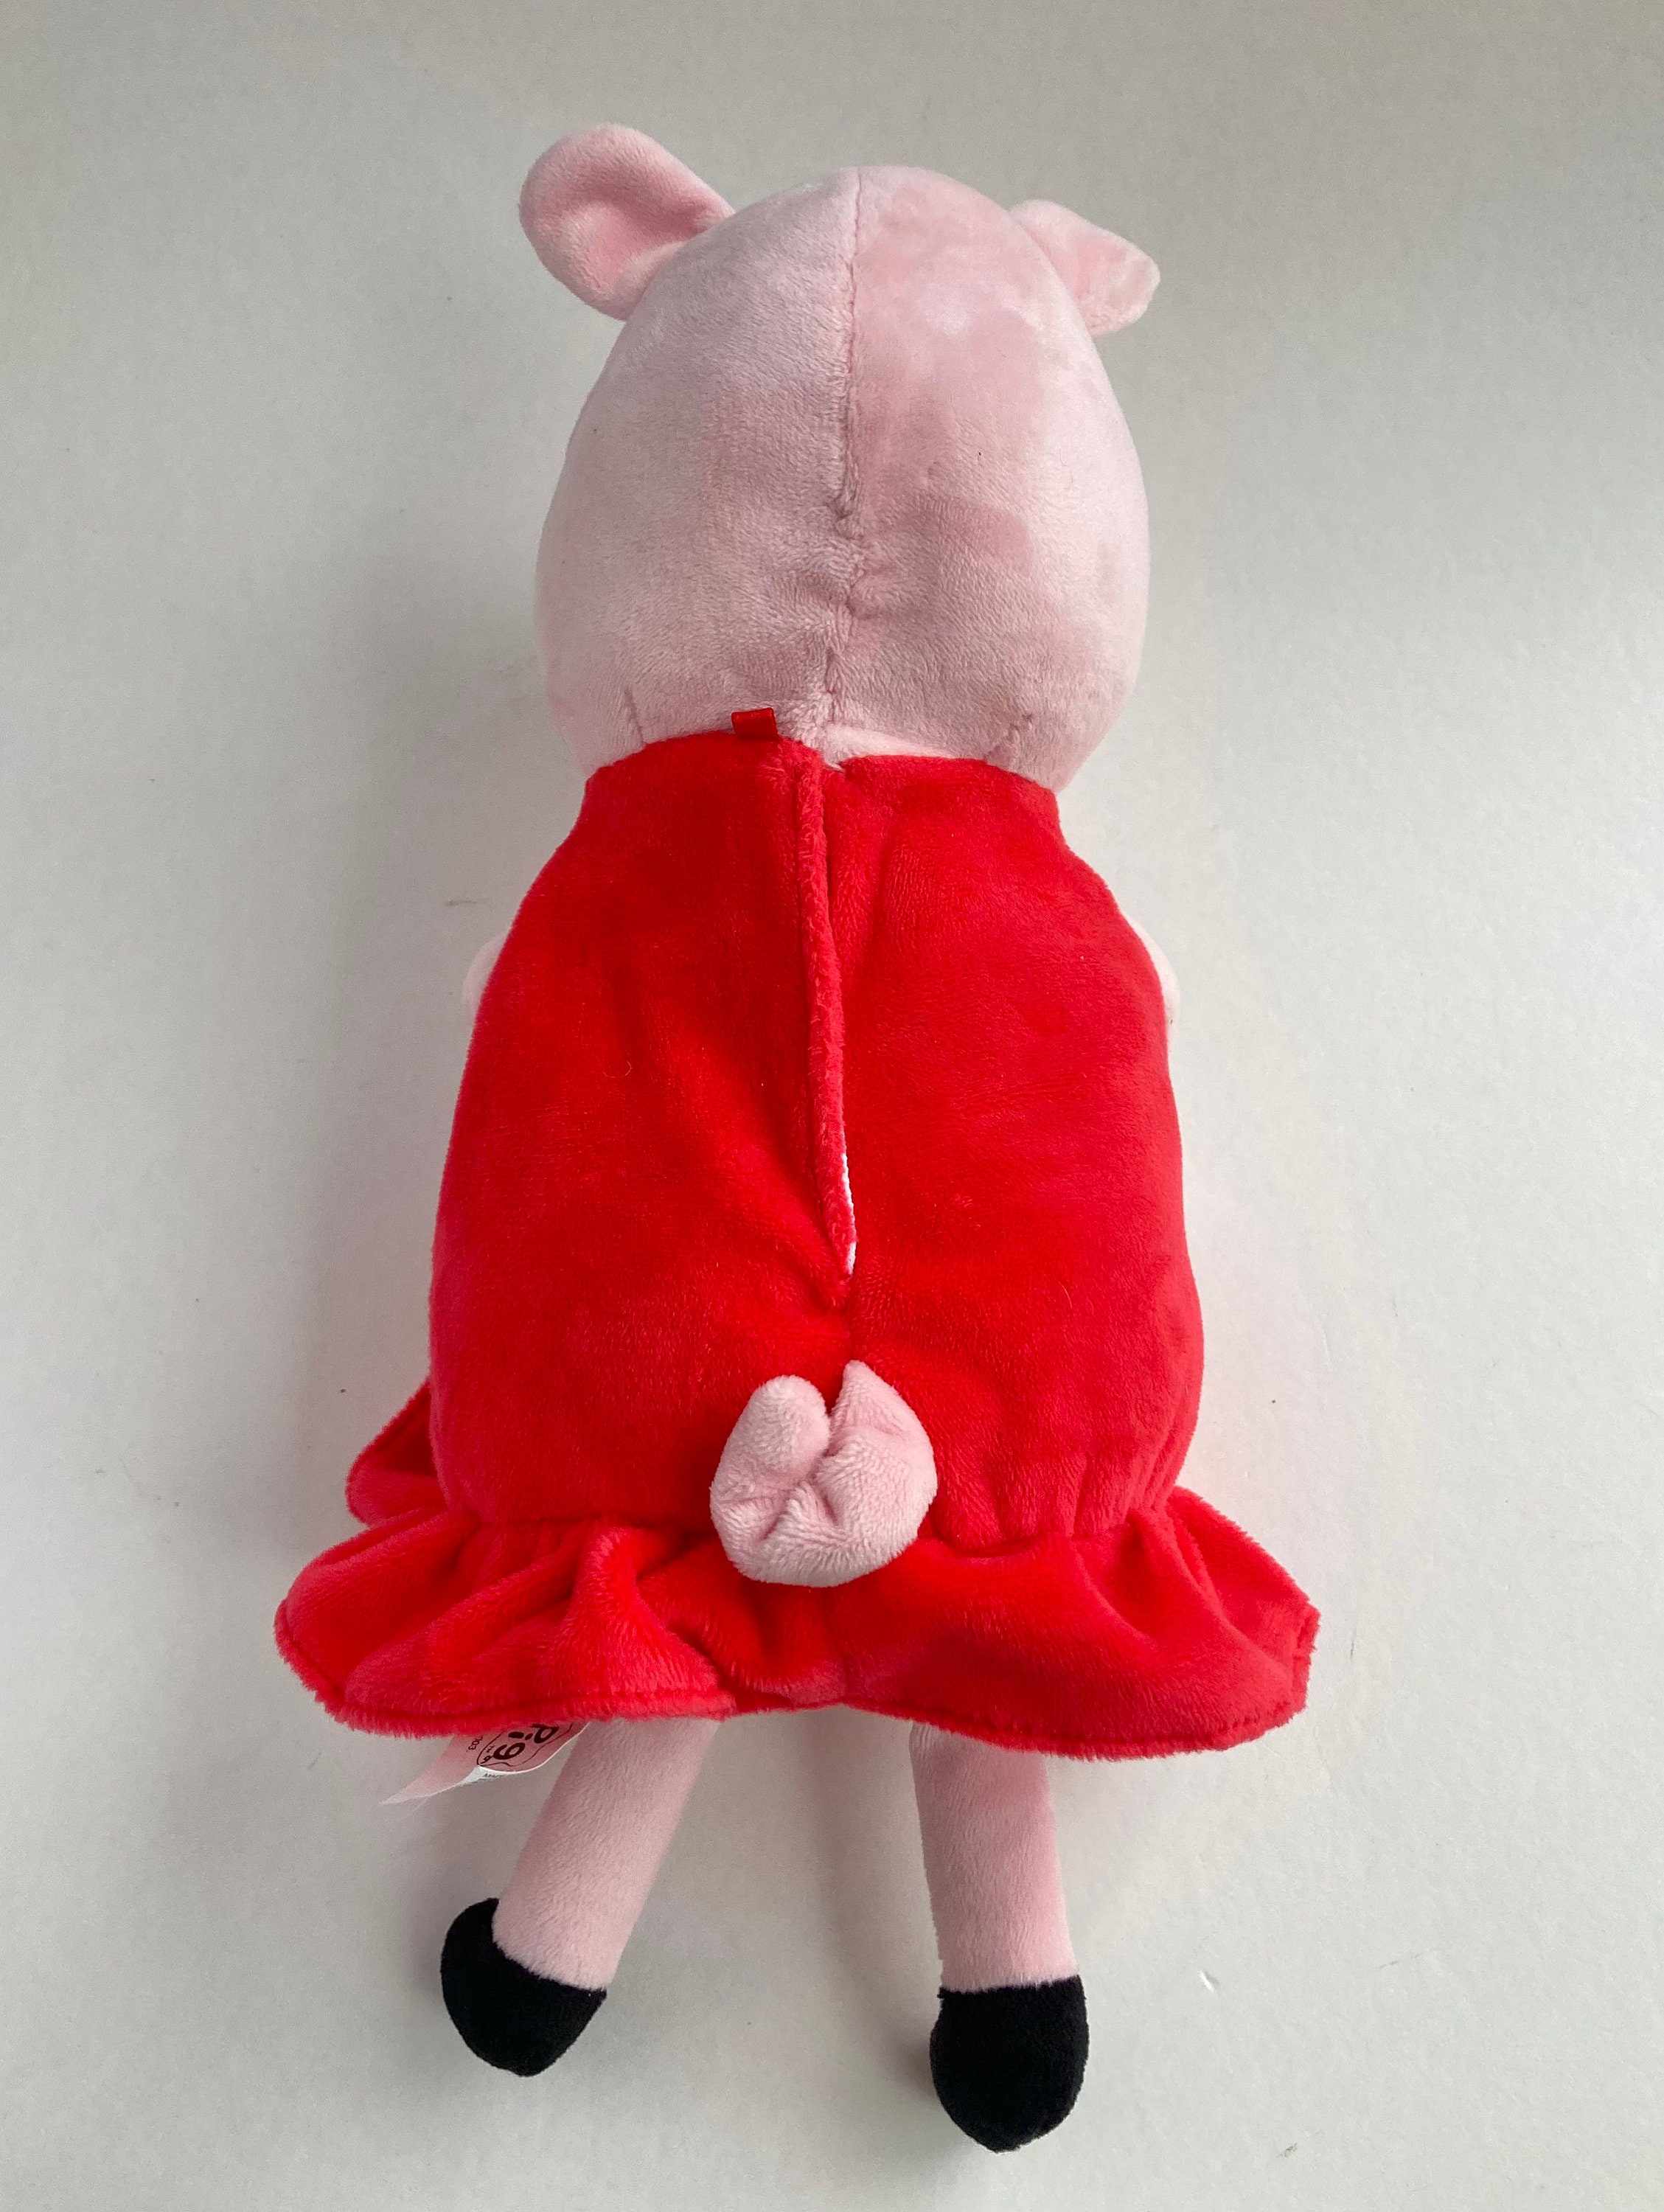 Peppa Pig Whistle N' Oink Plush Stuffed Animal Toy, Large 12